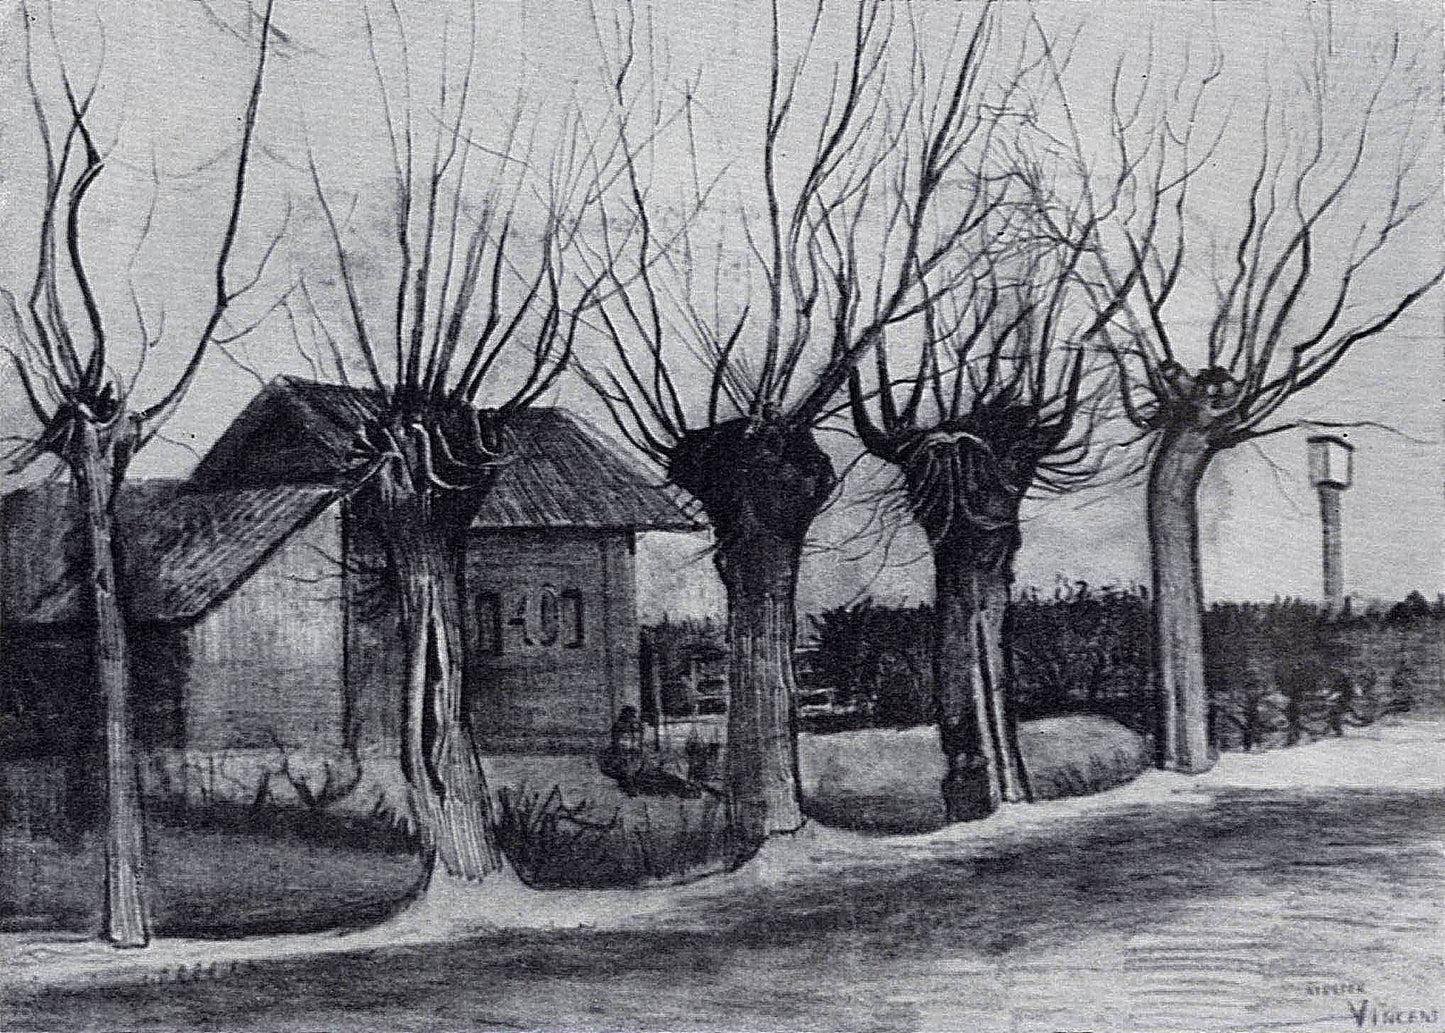 Small House on a Road with Pollard Willows, 1881